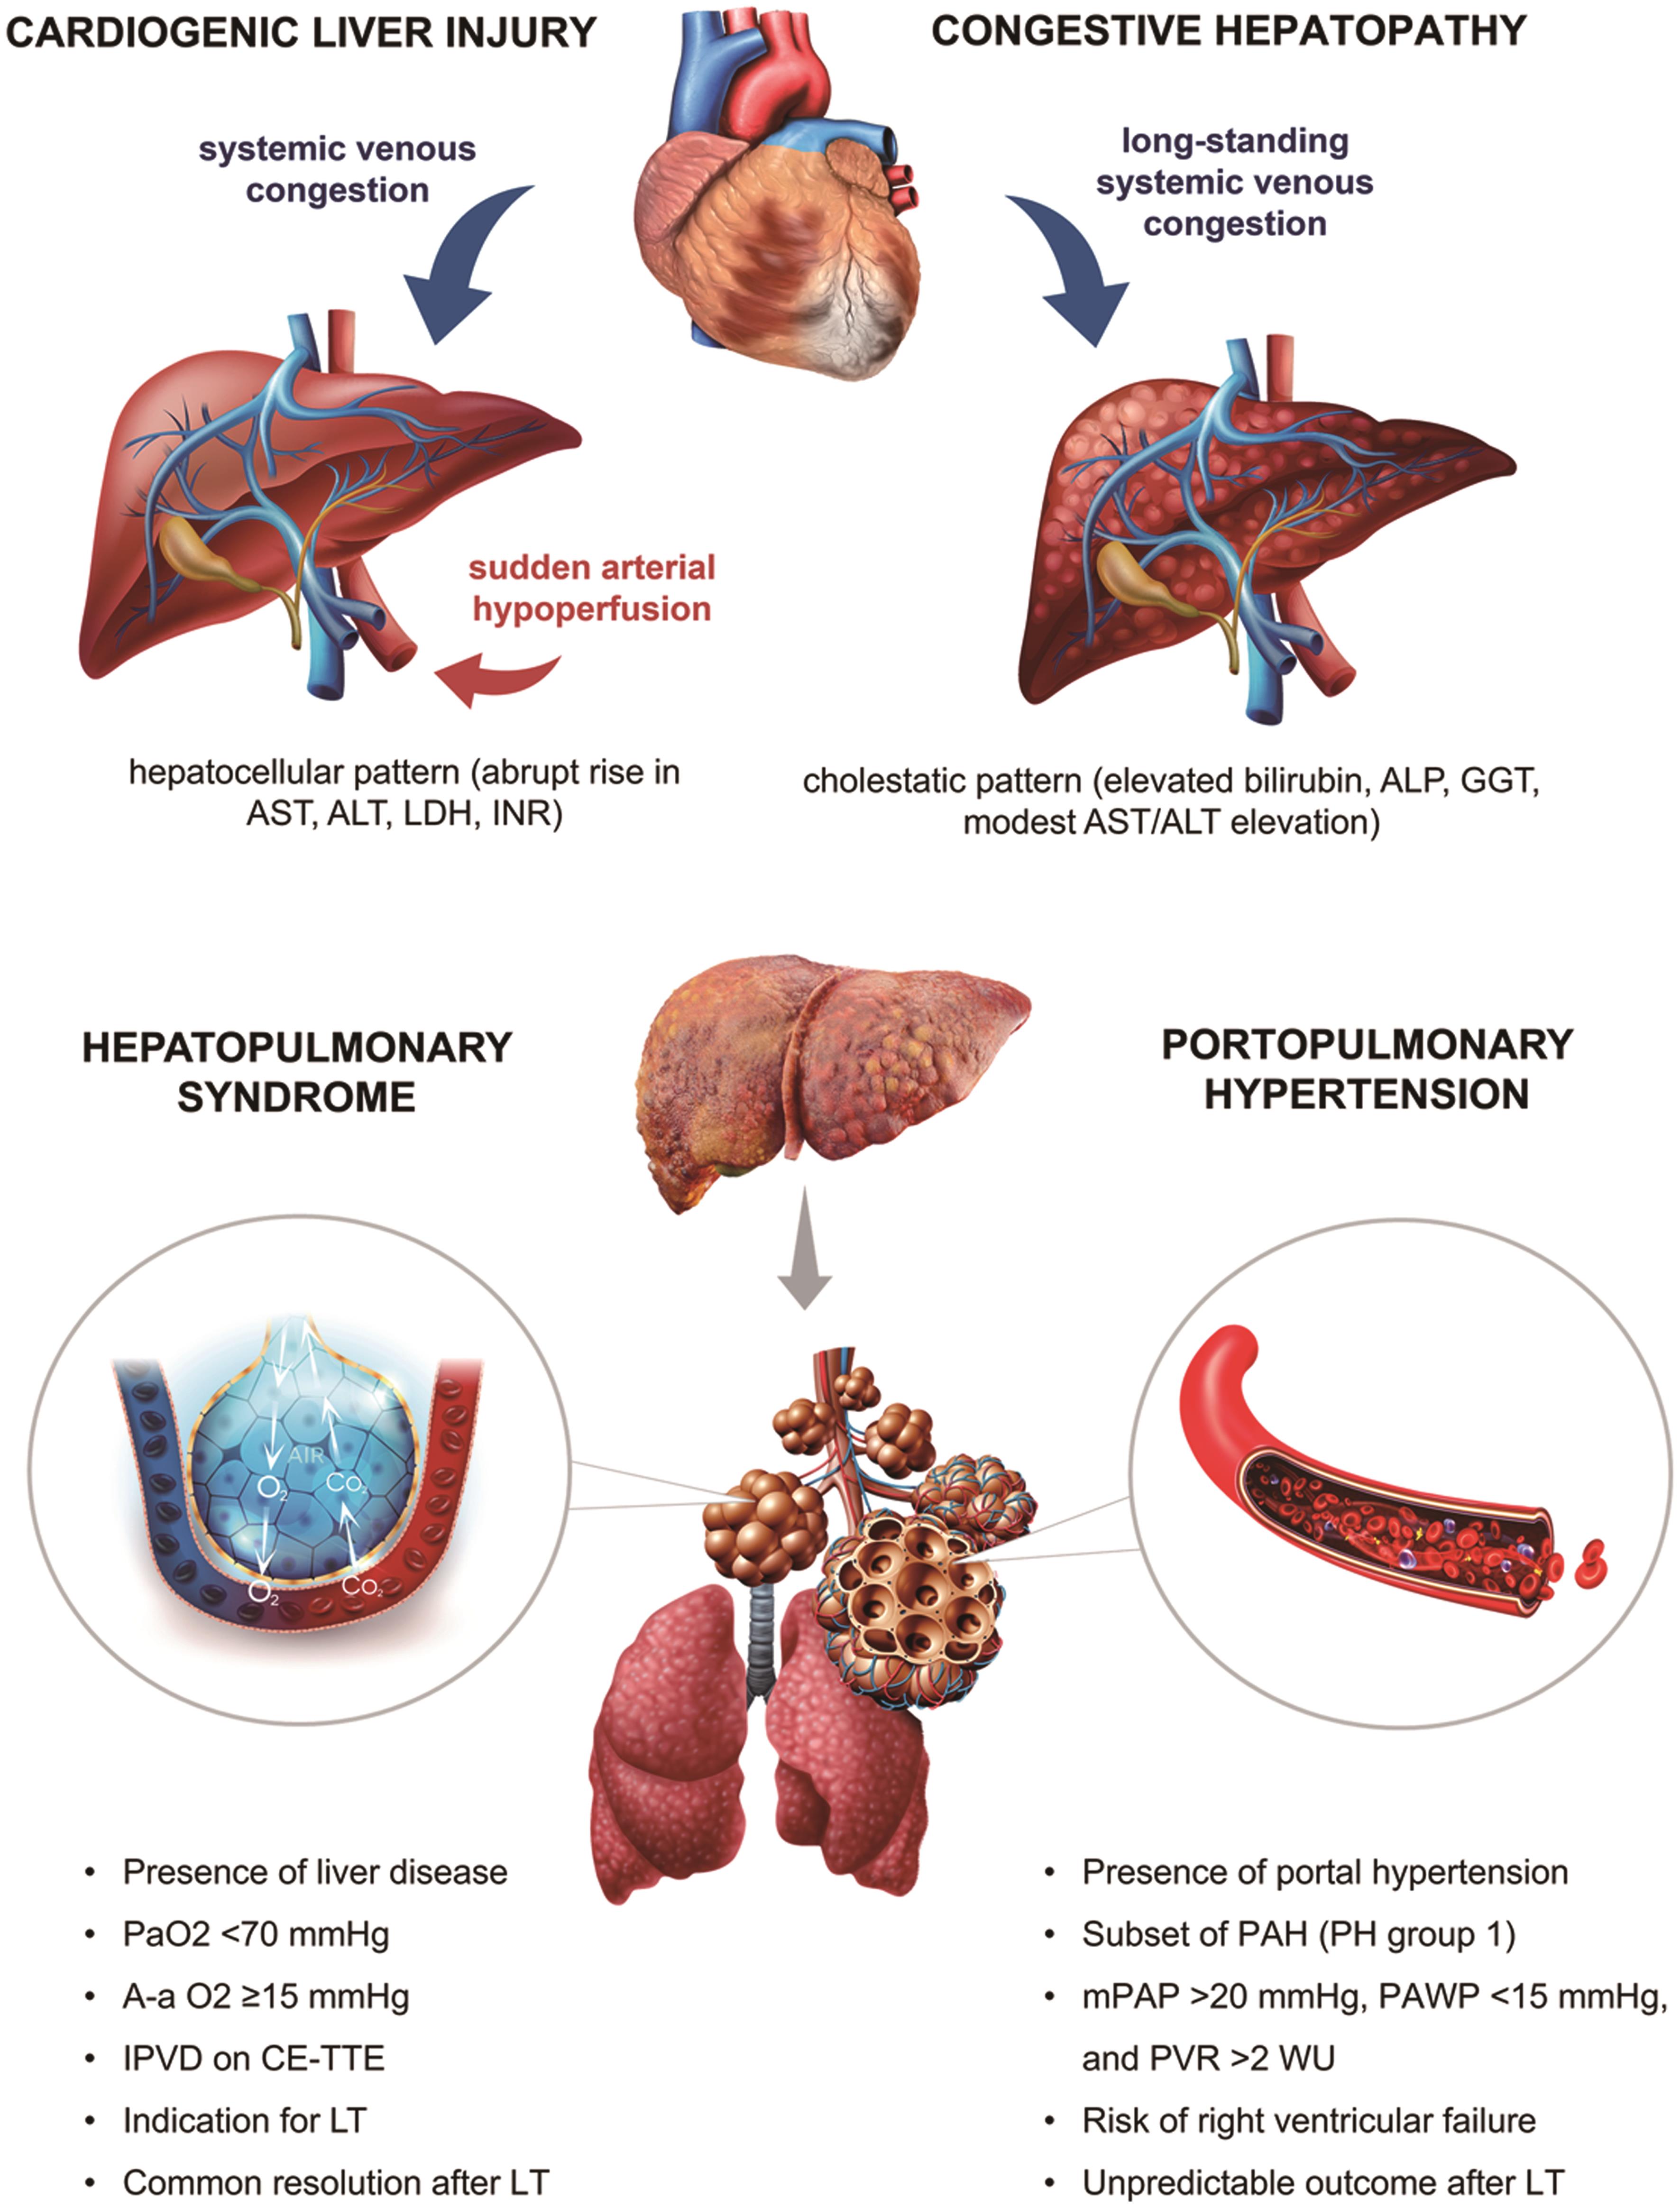 Clinical features of cardiac syndromes in liver disease.